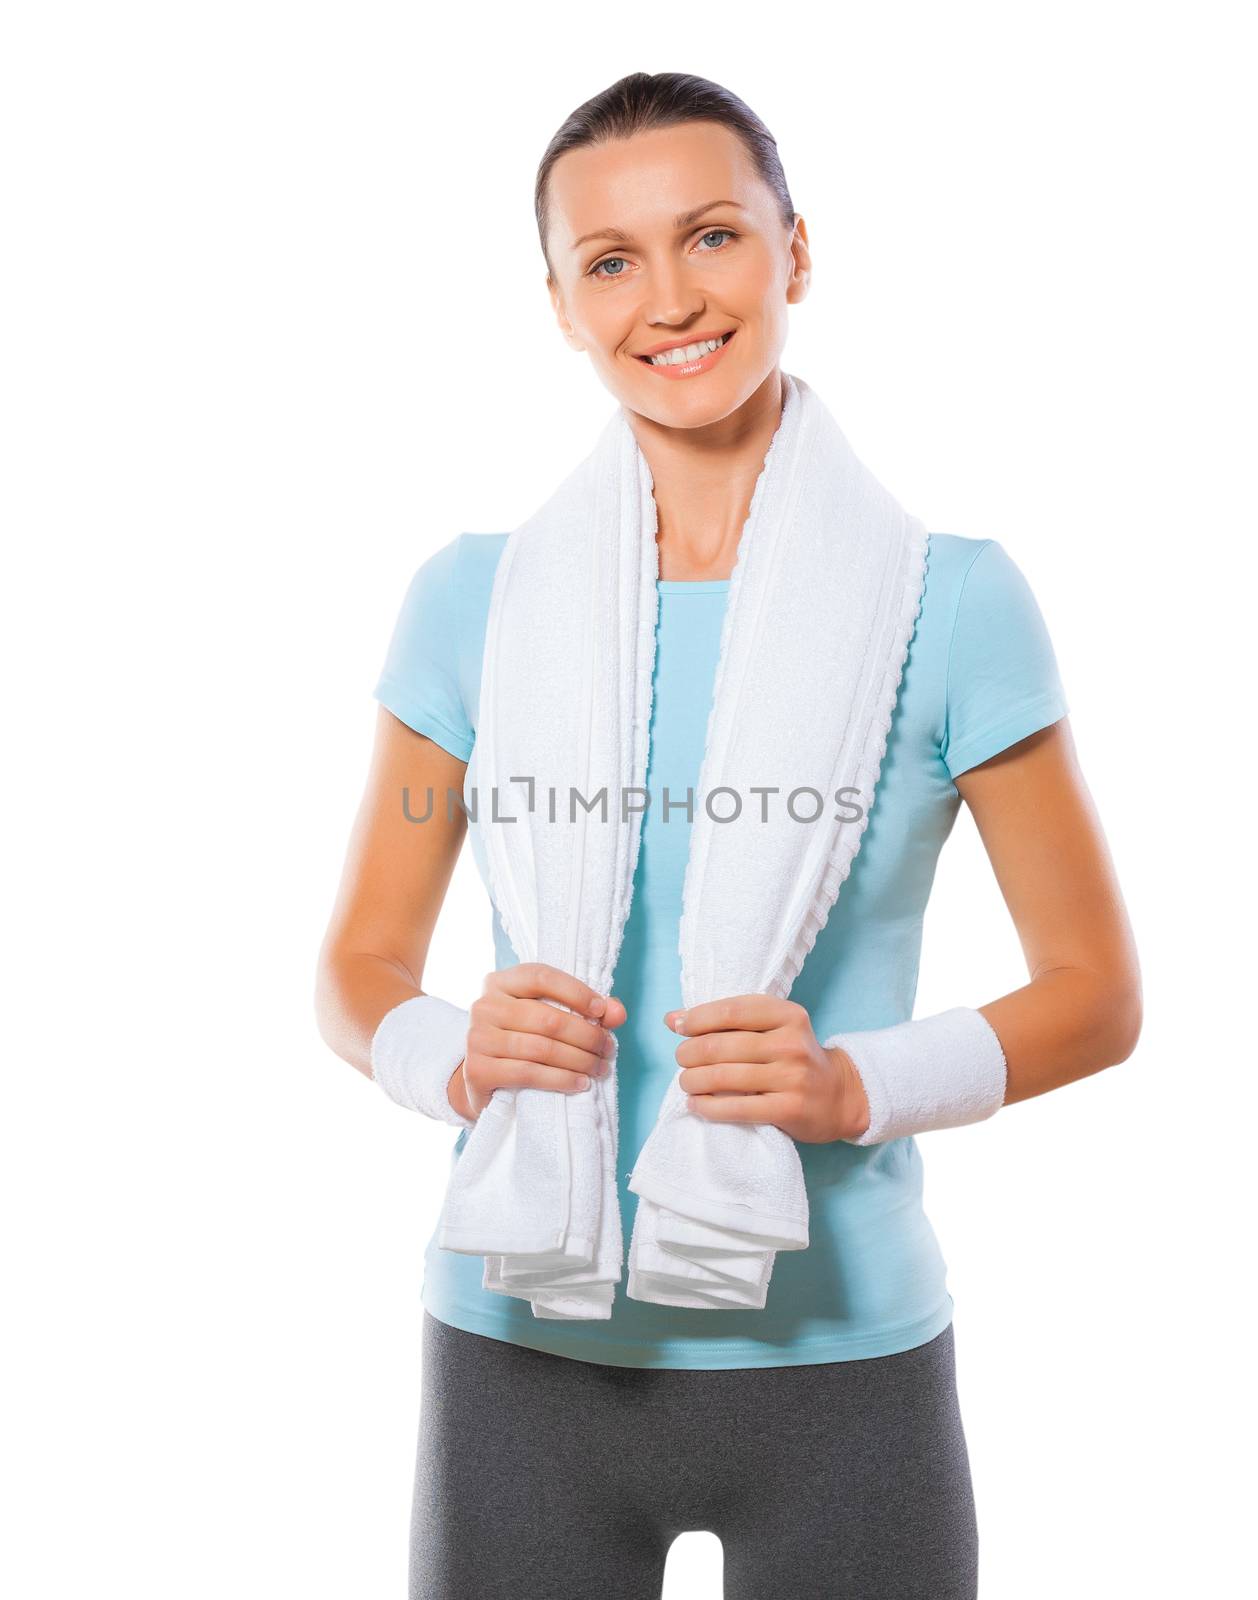 Fitness woman portrait isolated on white background. Smiling happy female fitness model looking at camera.